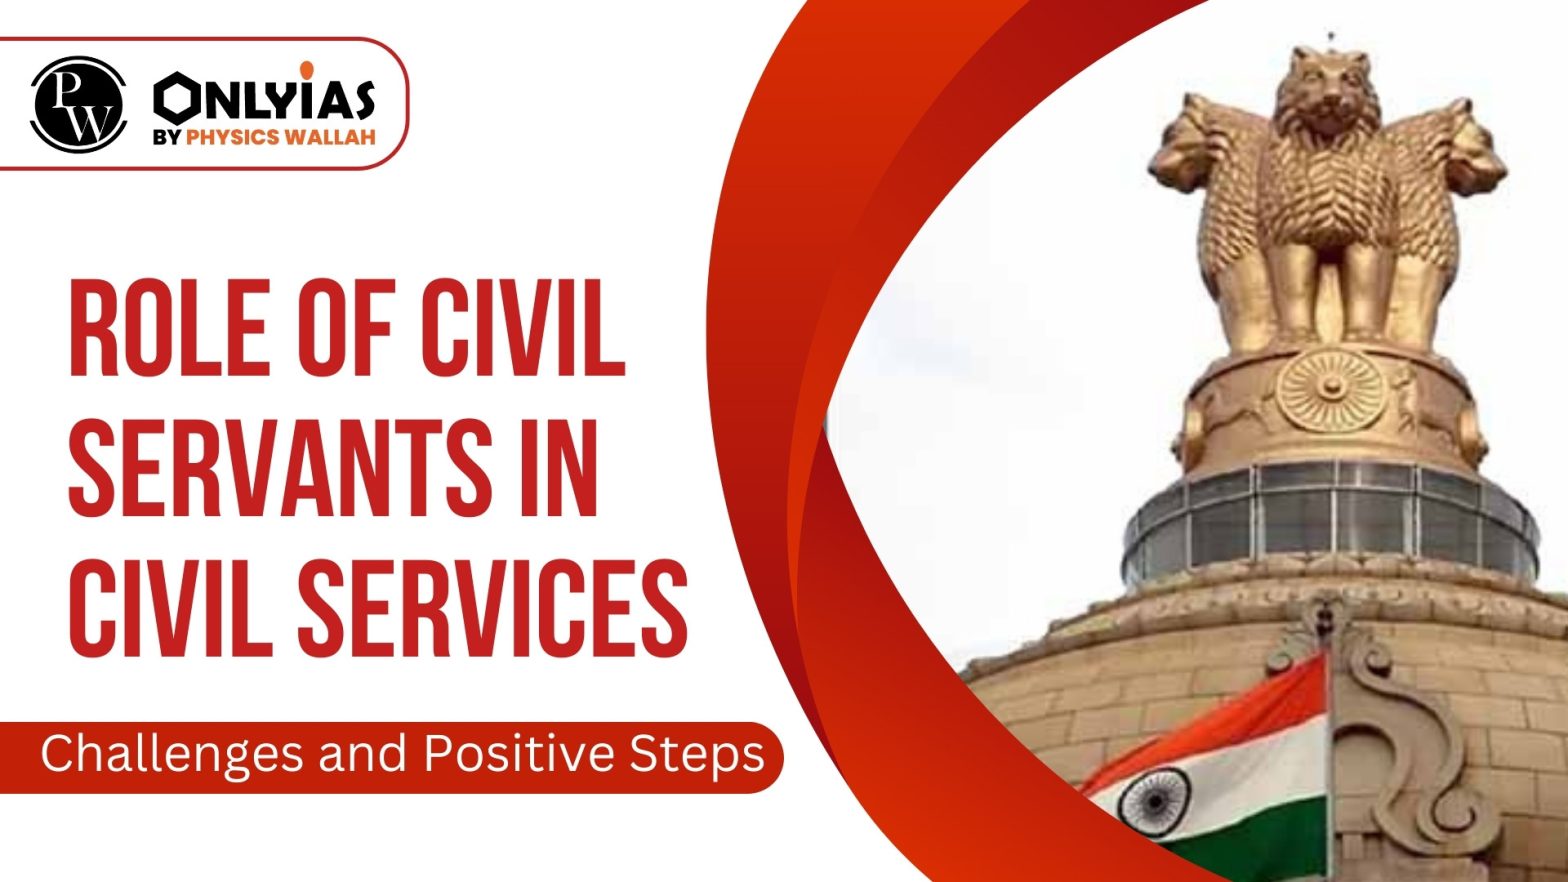 Role of Civil Servants in Civil Services: Challenges and Positive Steps